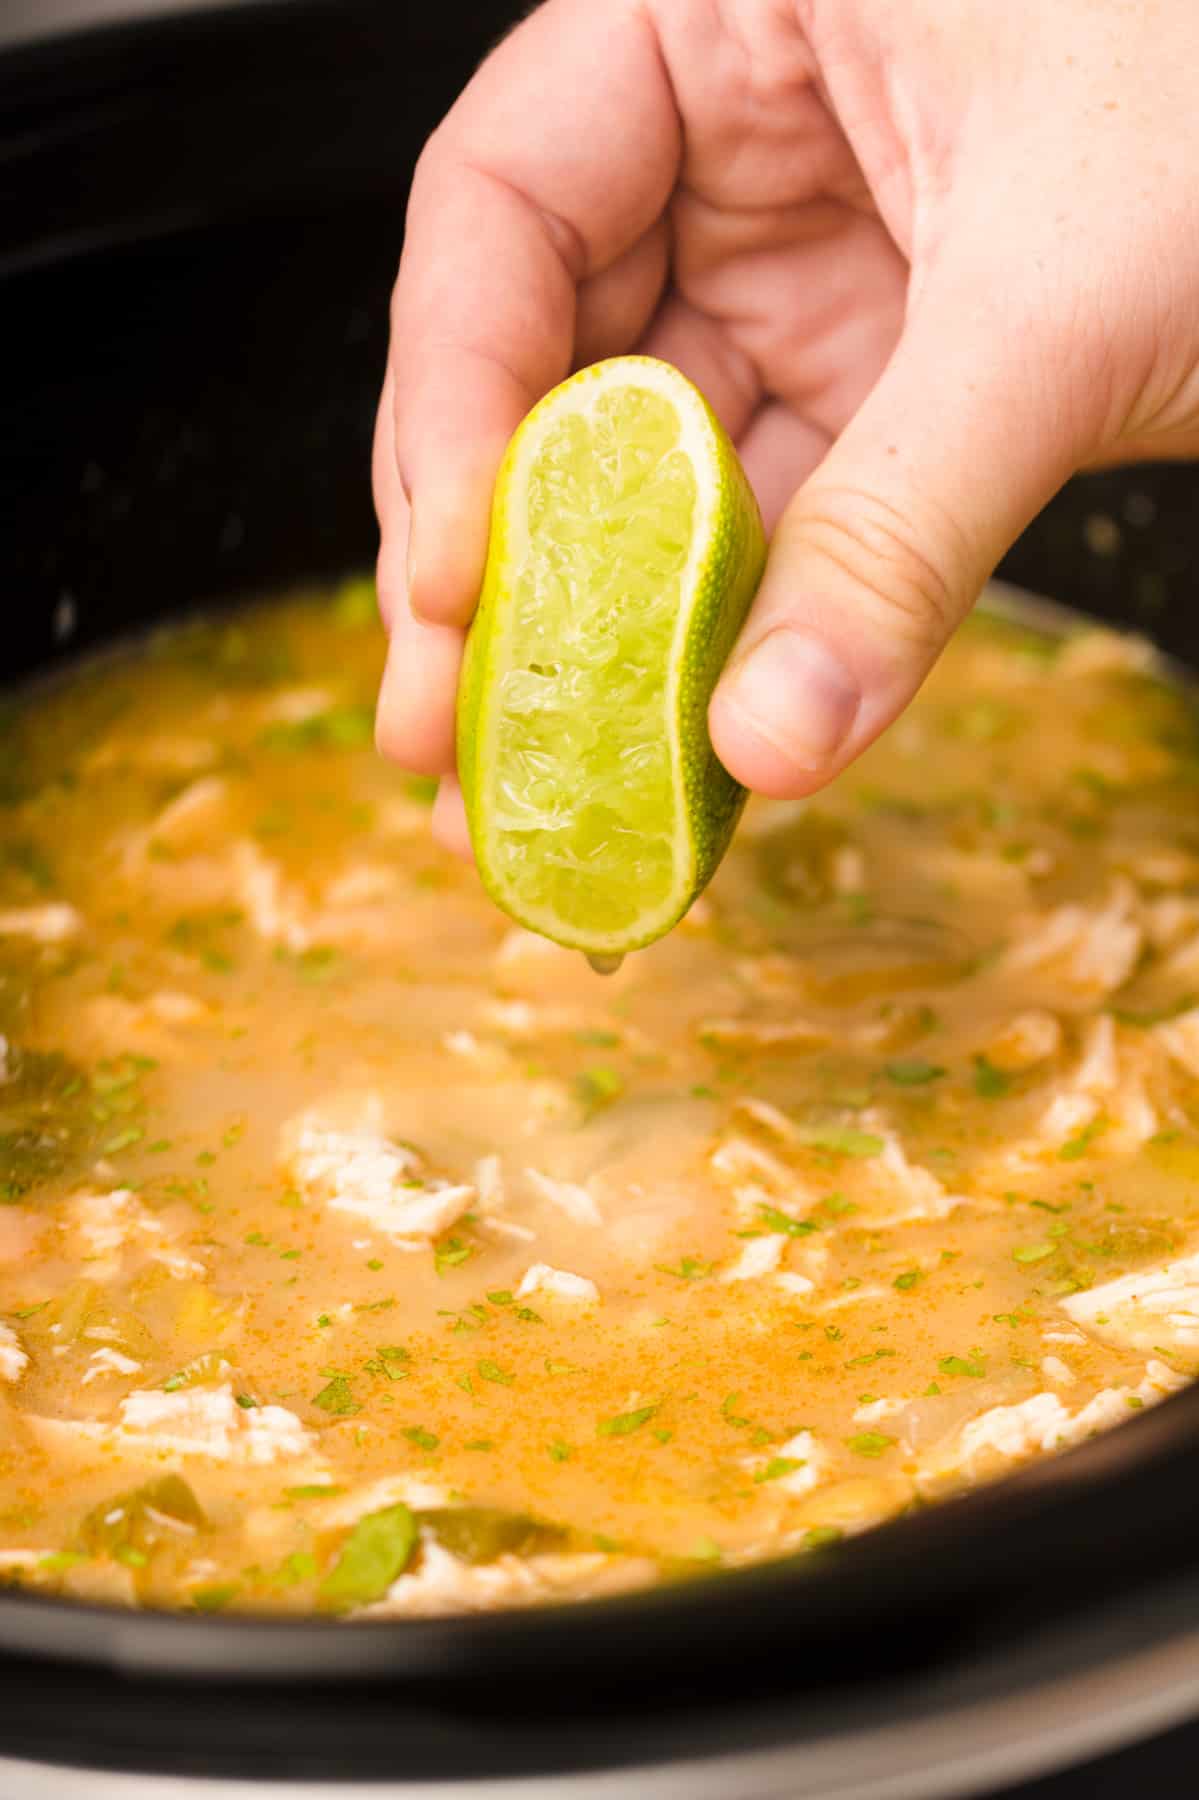 hand squeezing lime into chicken chili